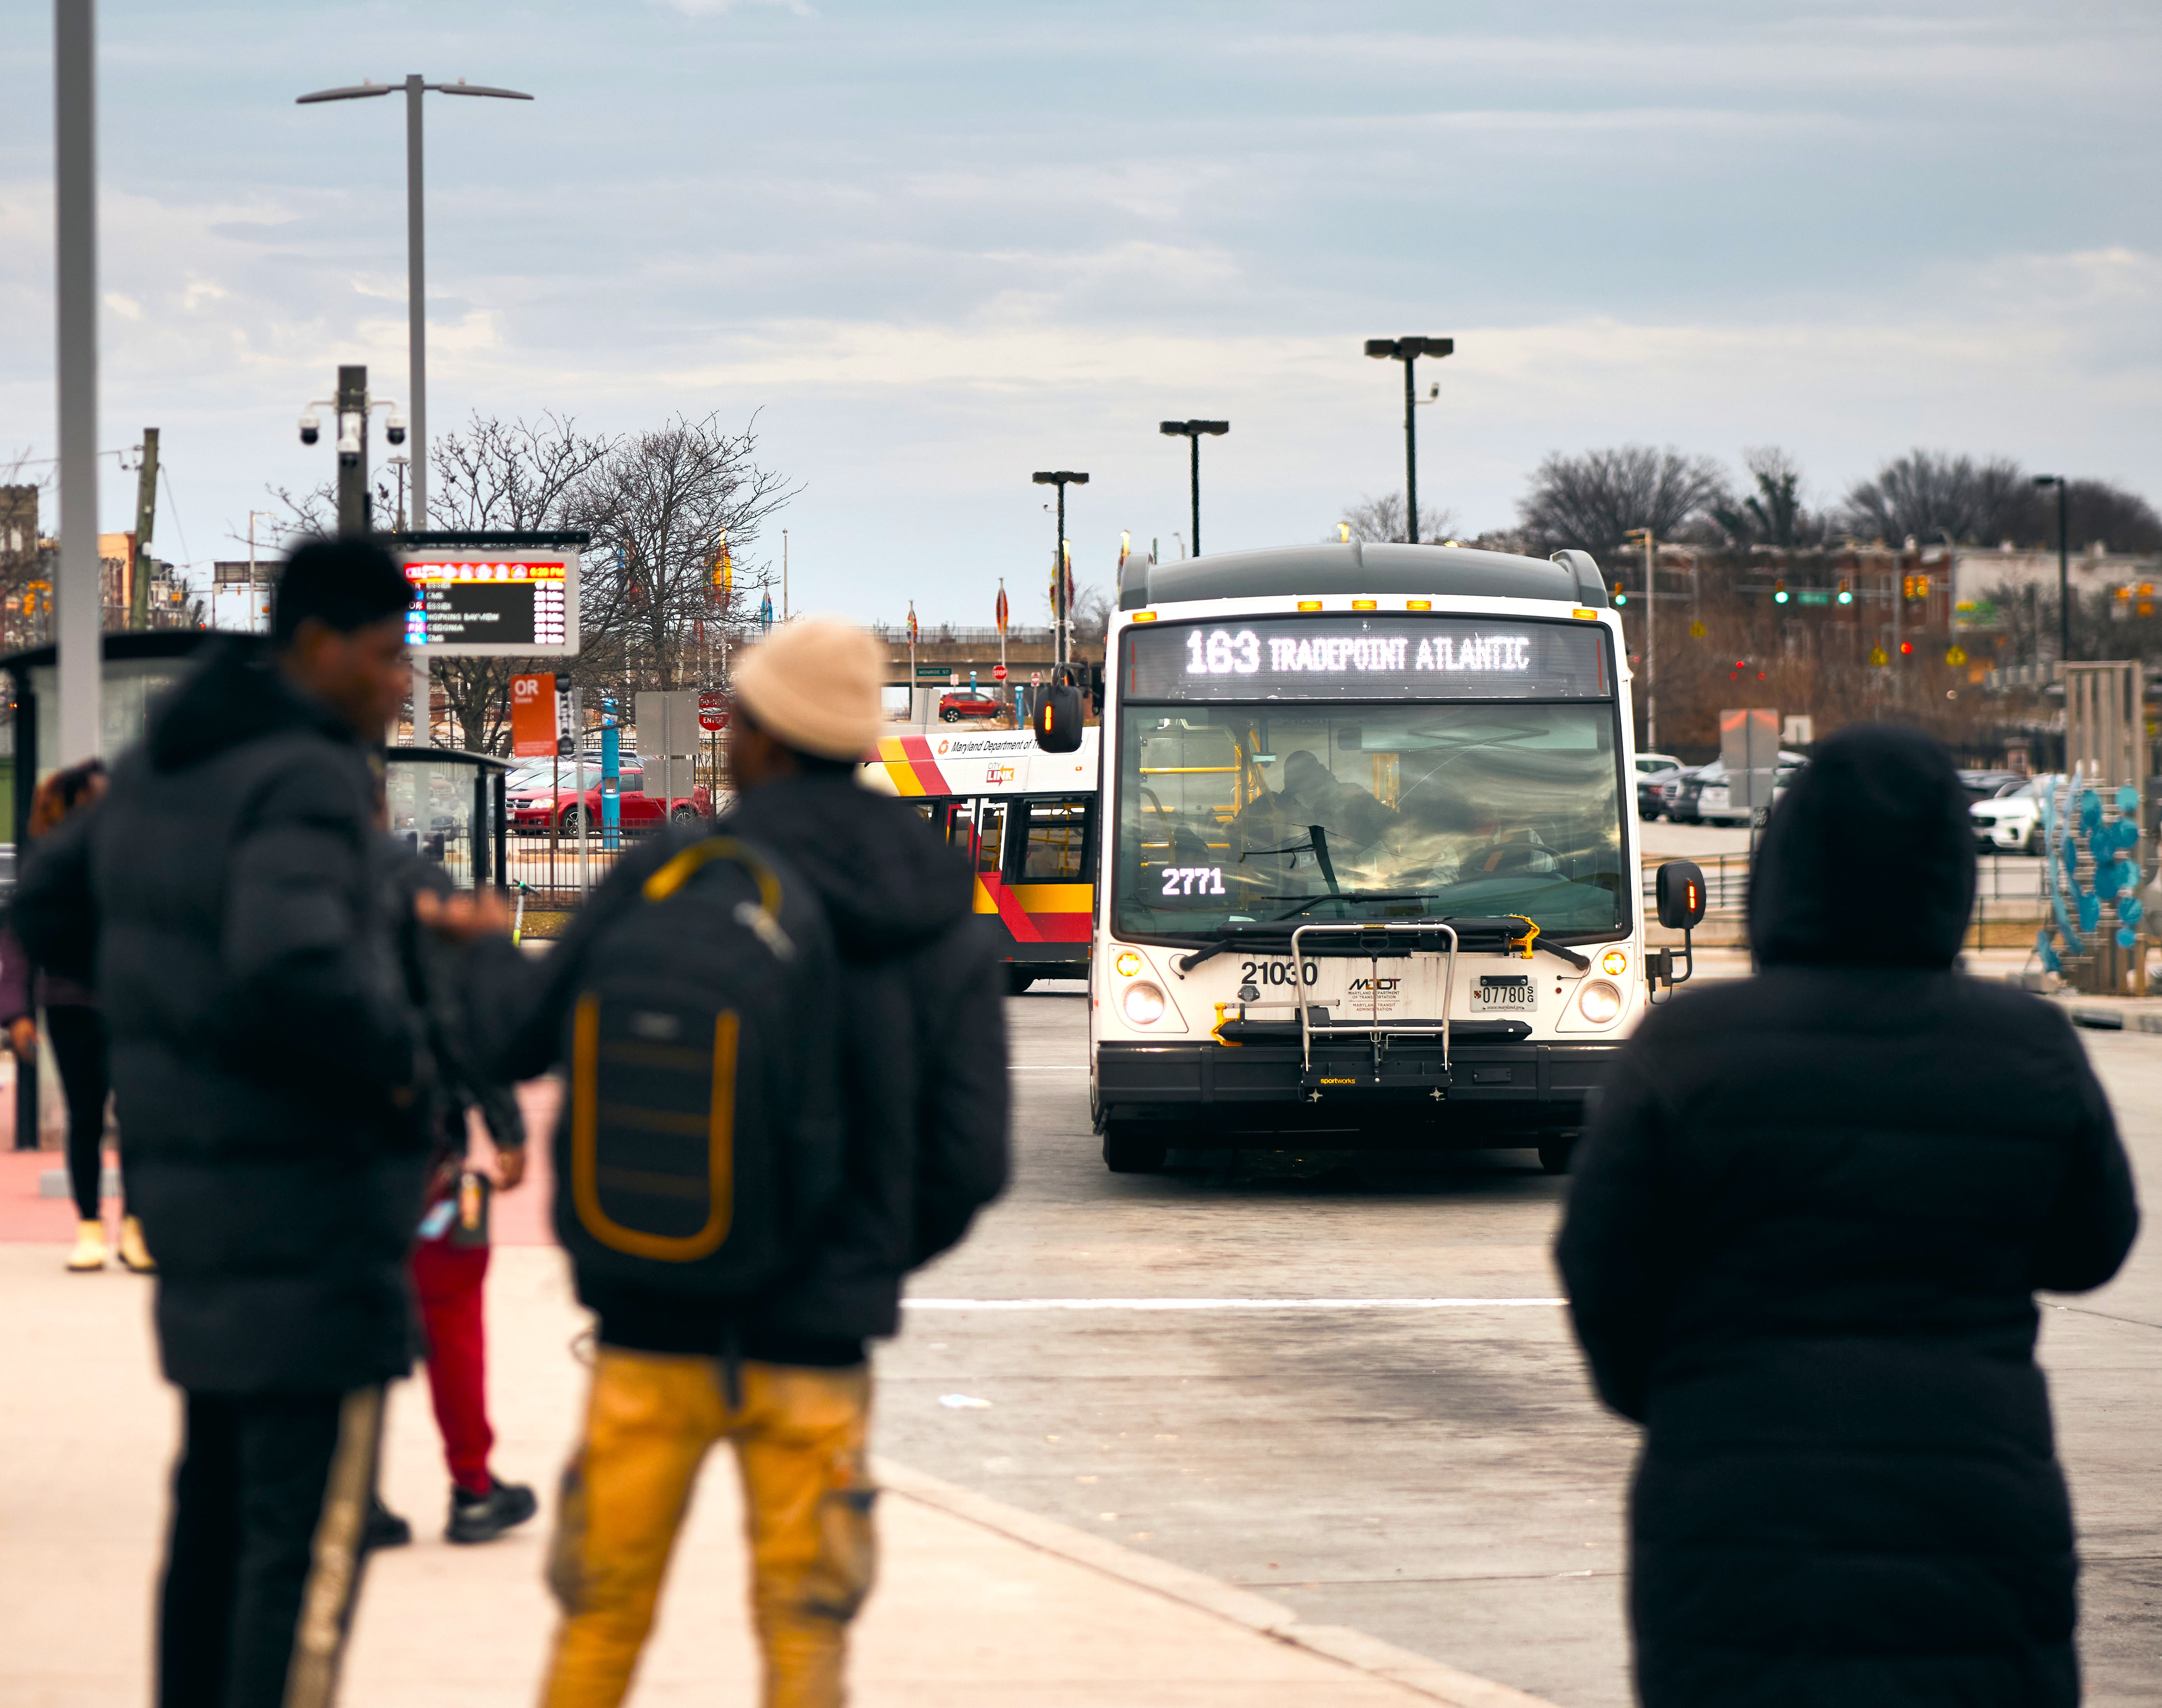 CMTA Transit report card D+ for Baltimore region - Why?